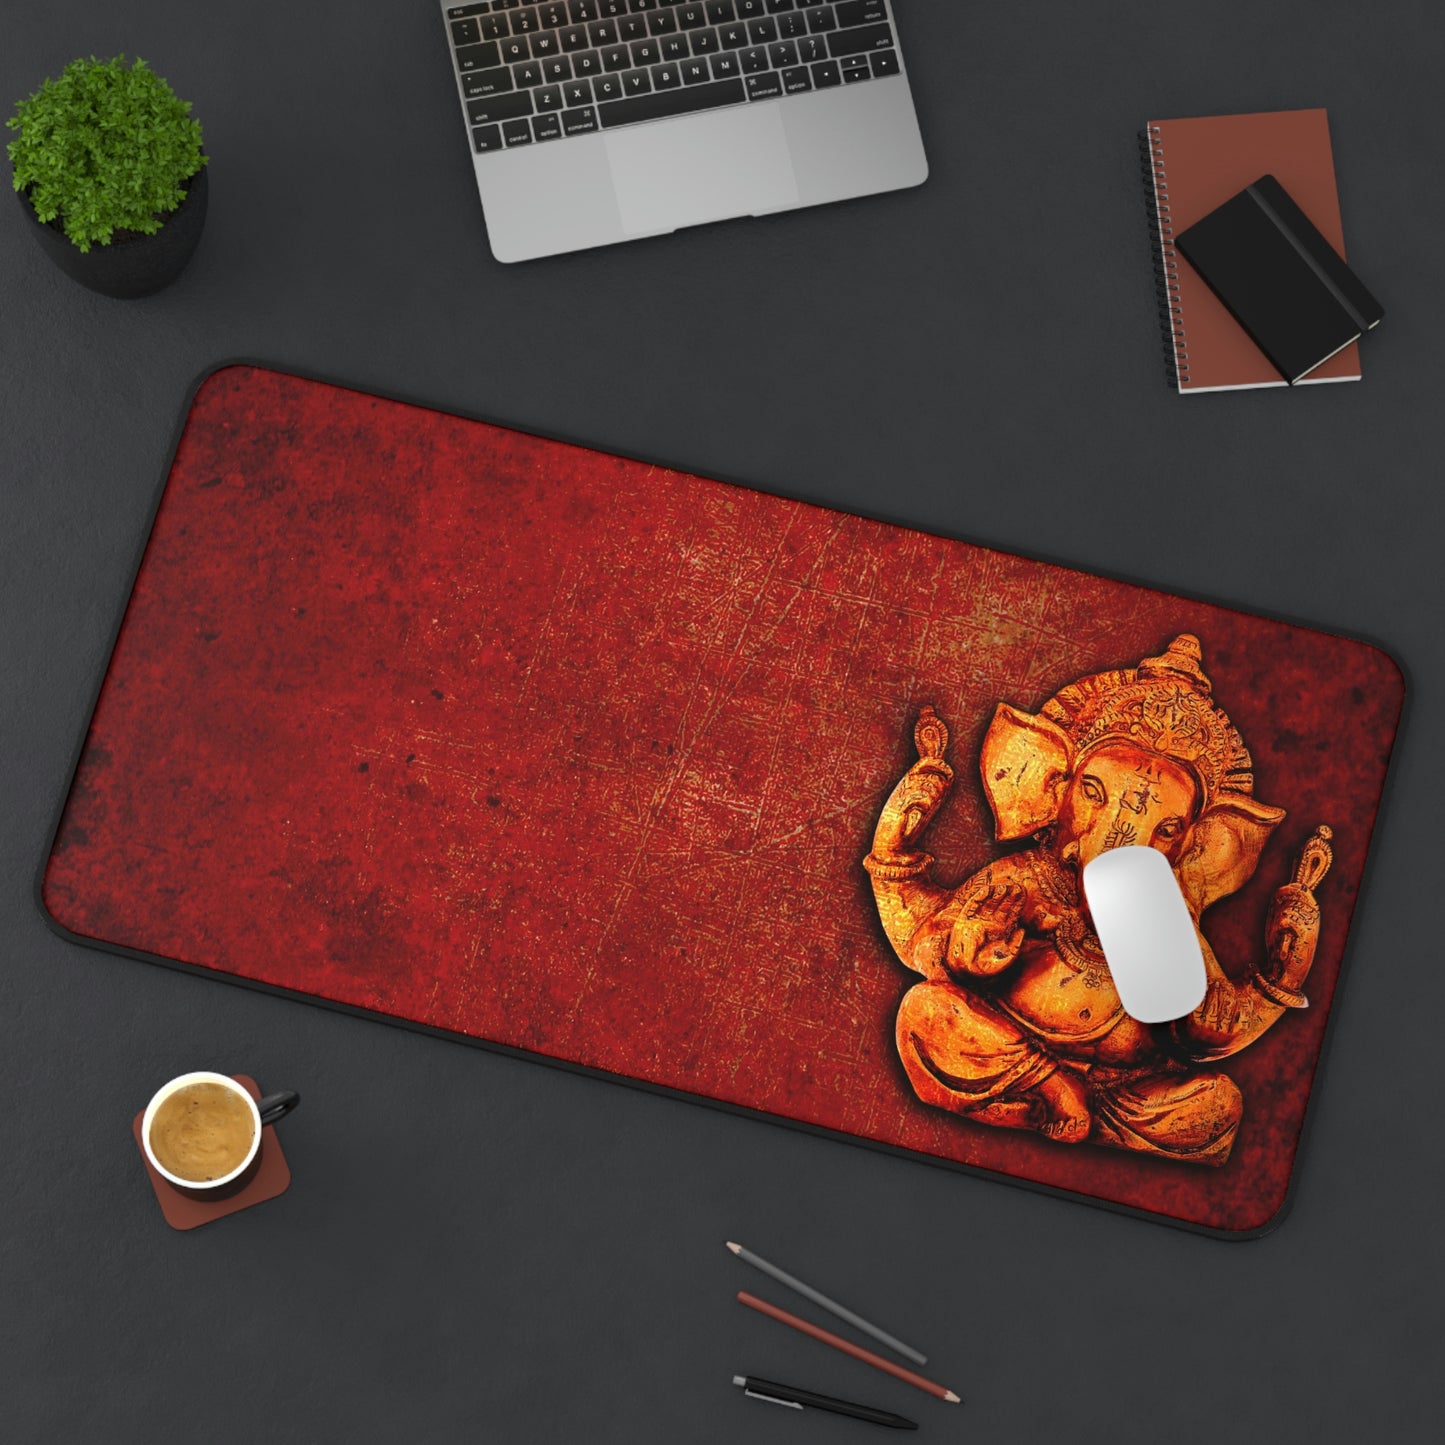 Gold Ganesha on Lava Red Background Print on Neoprene Desk Mat 15.5 by 31 in situ